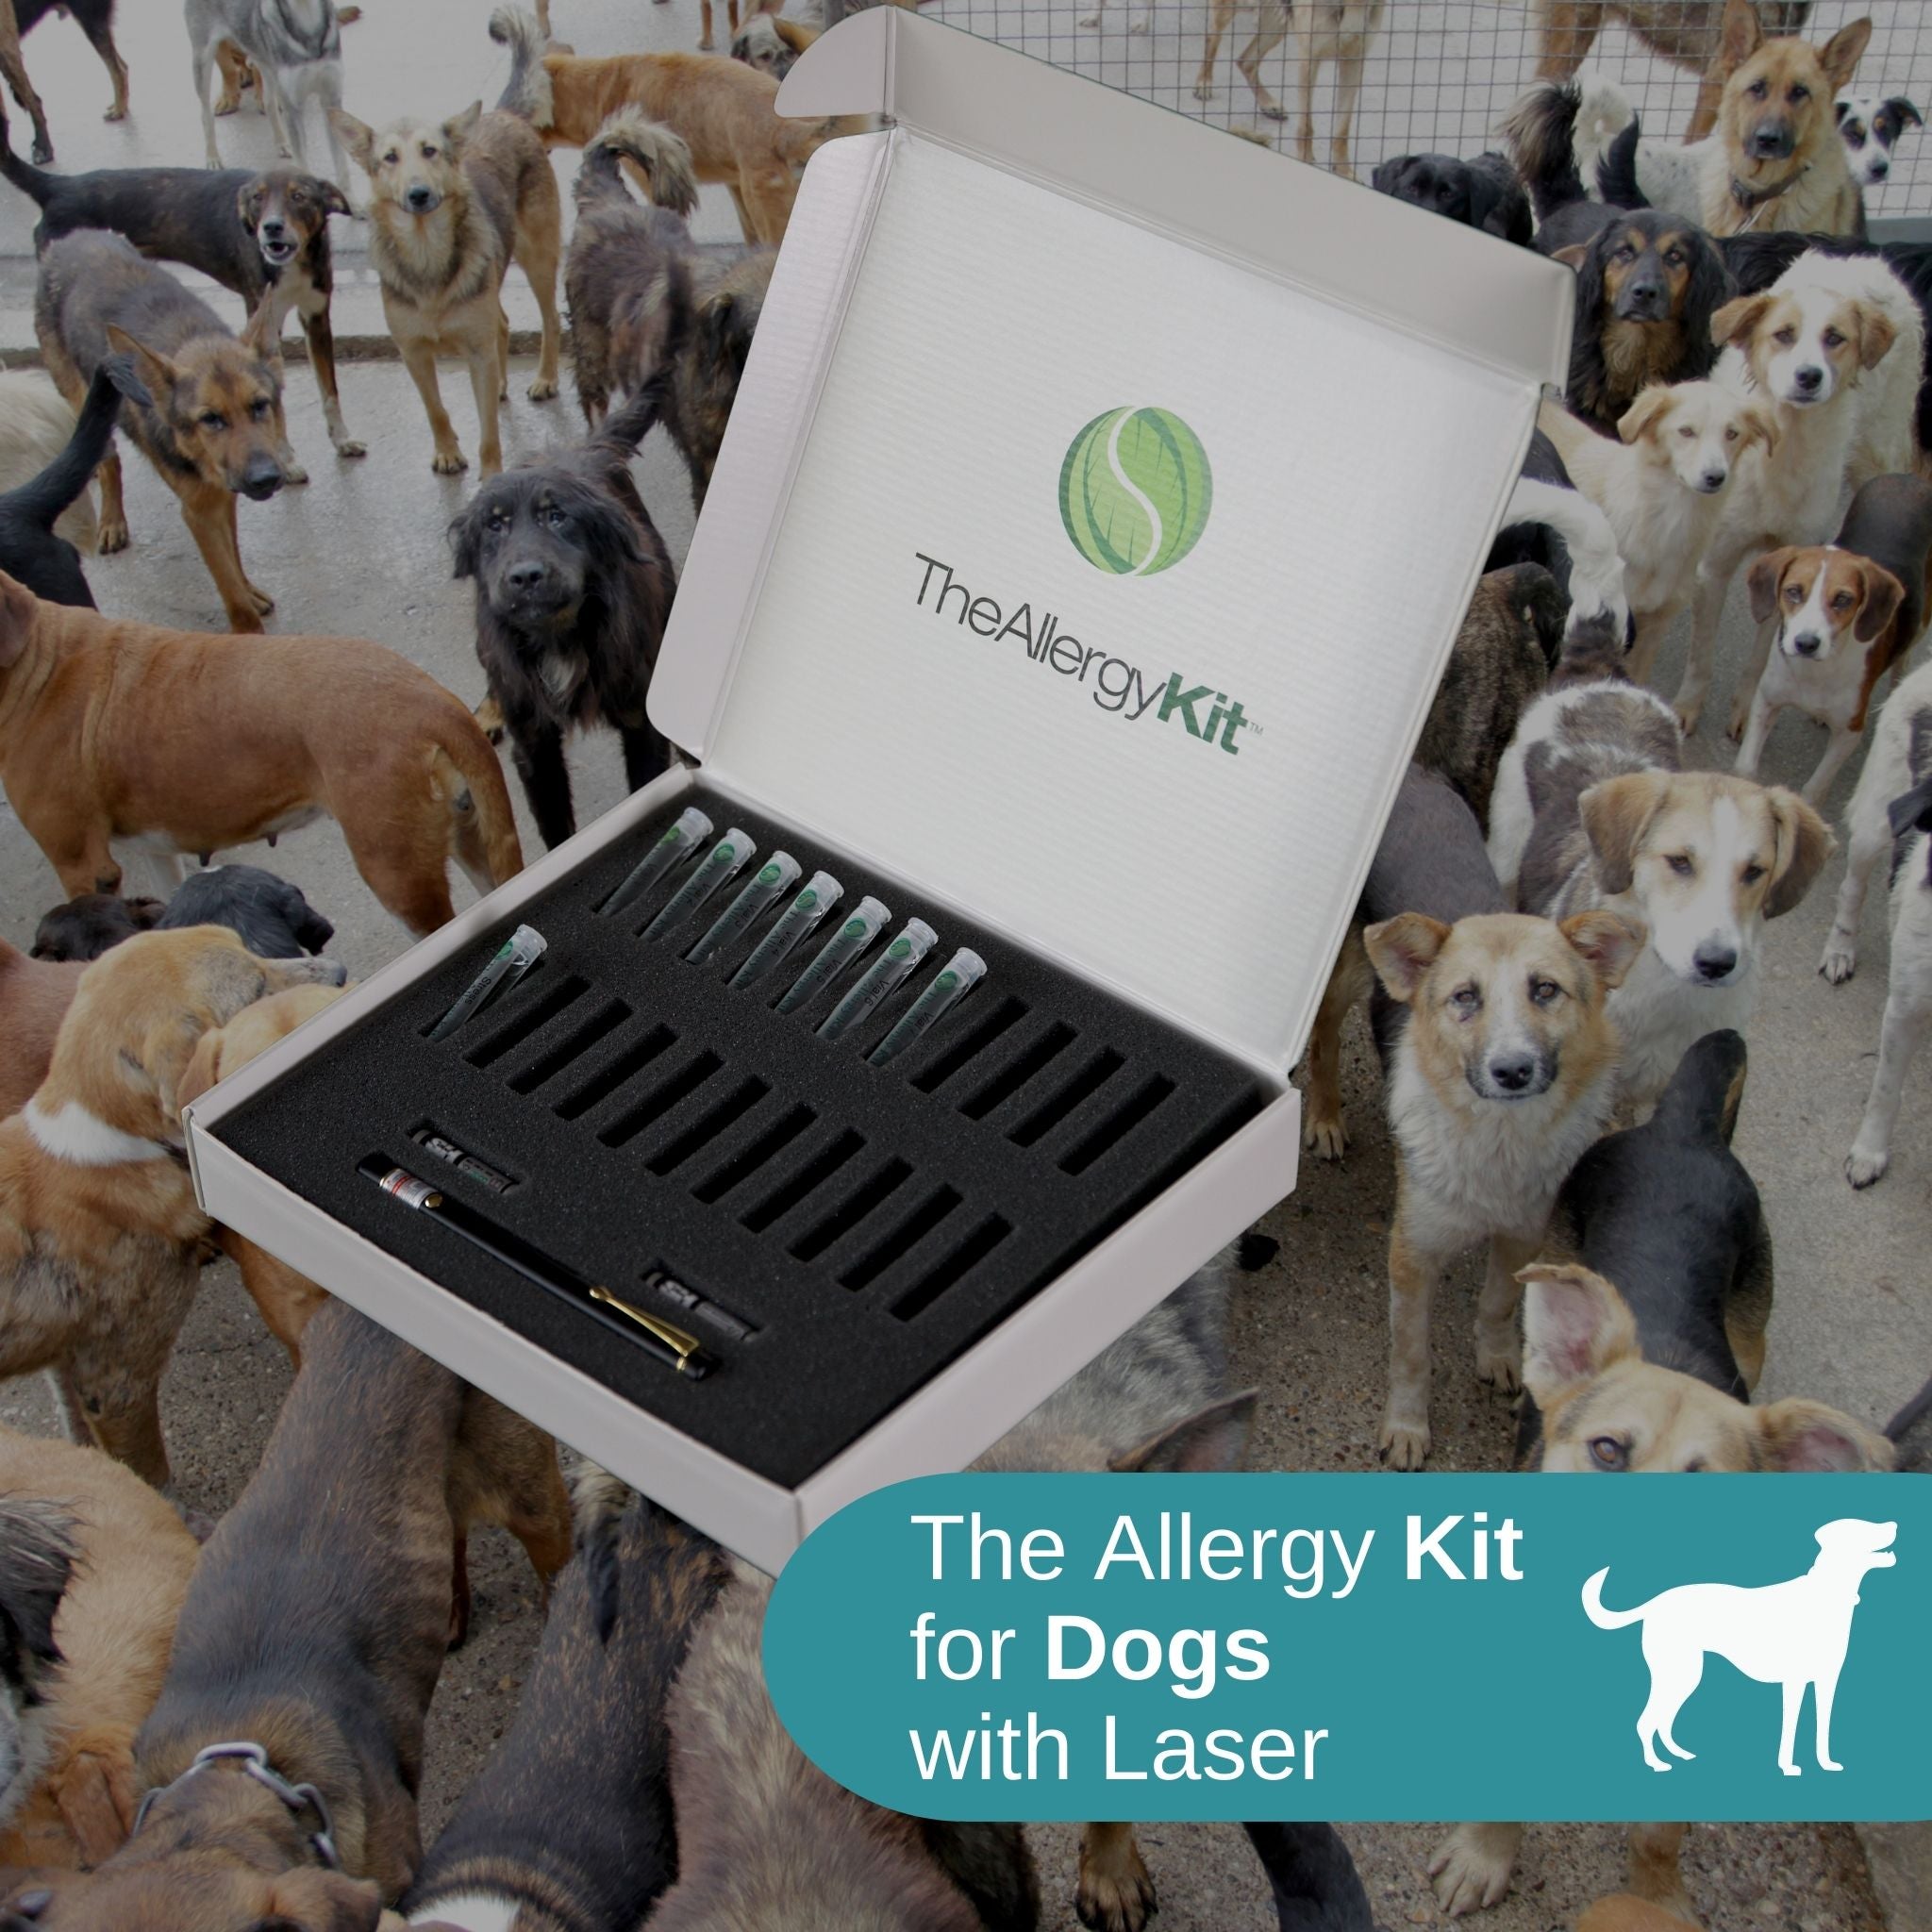 The Allergy Kit for Dogs with Laser